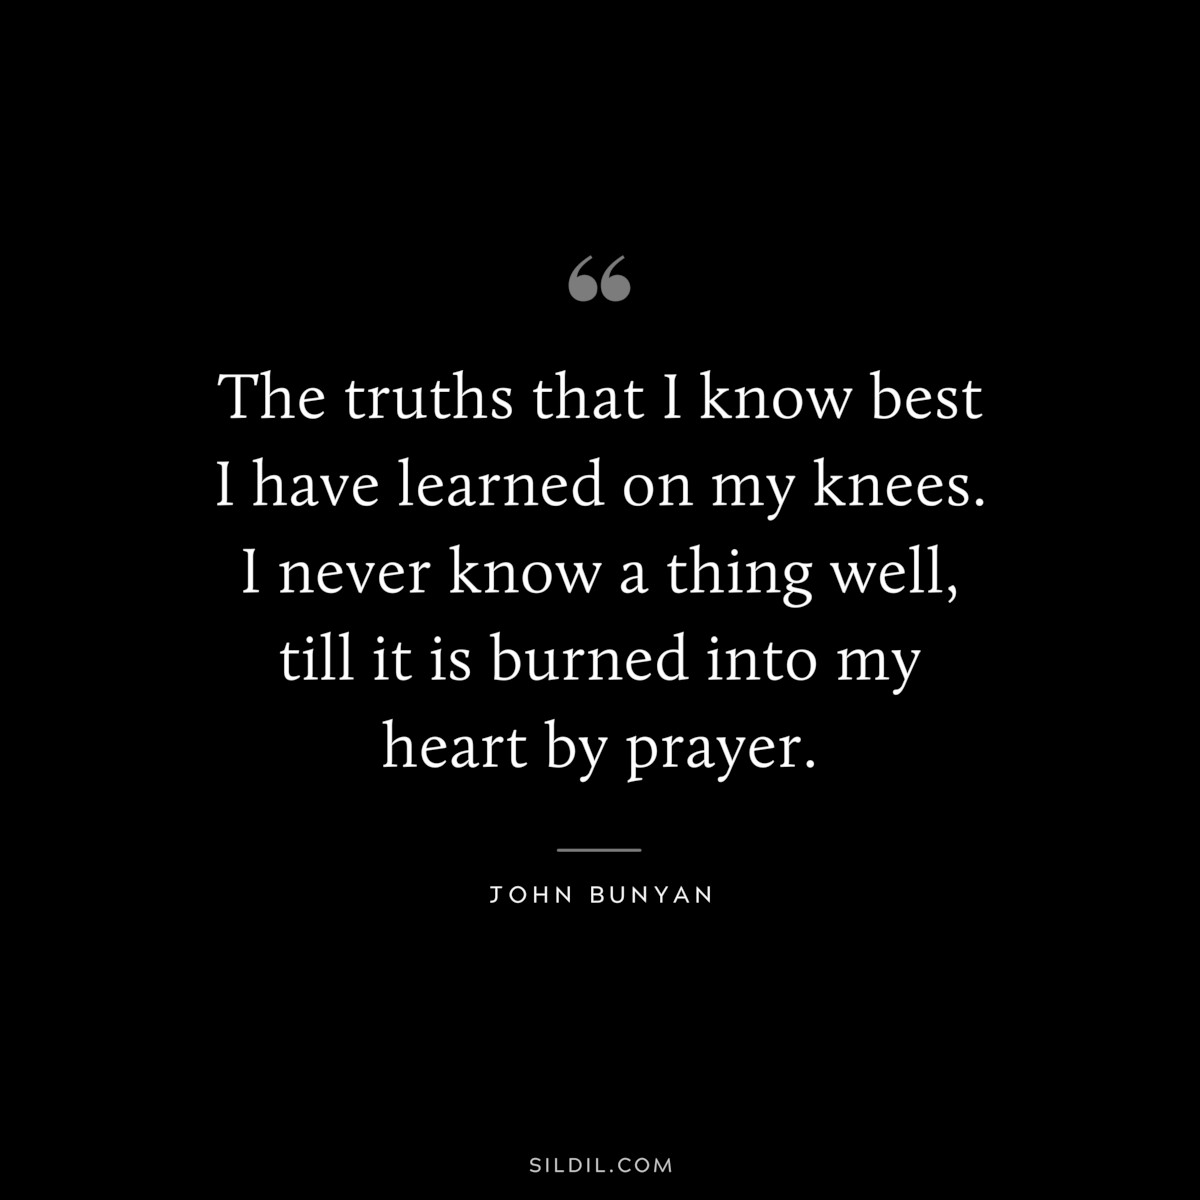 The truths that I know best I have learned on my knees. I never know a thing well, till it is burned into my heart by prayer. ― John Bunyan